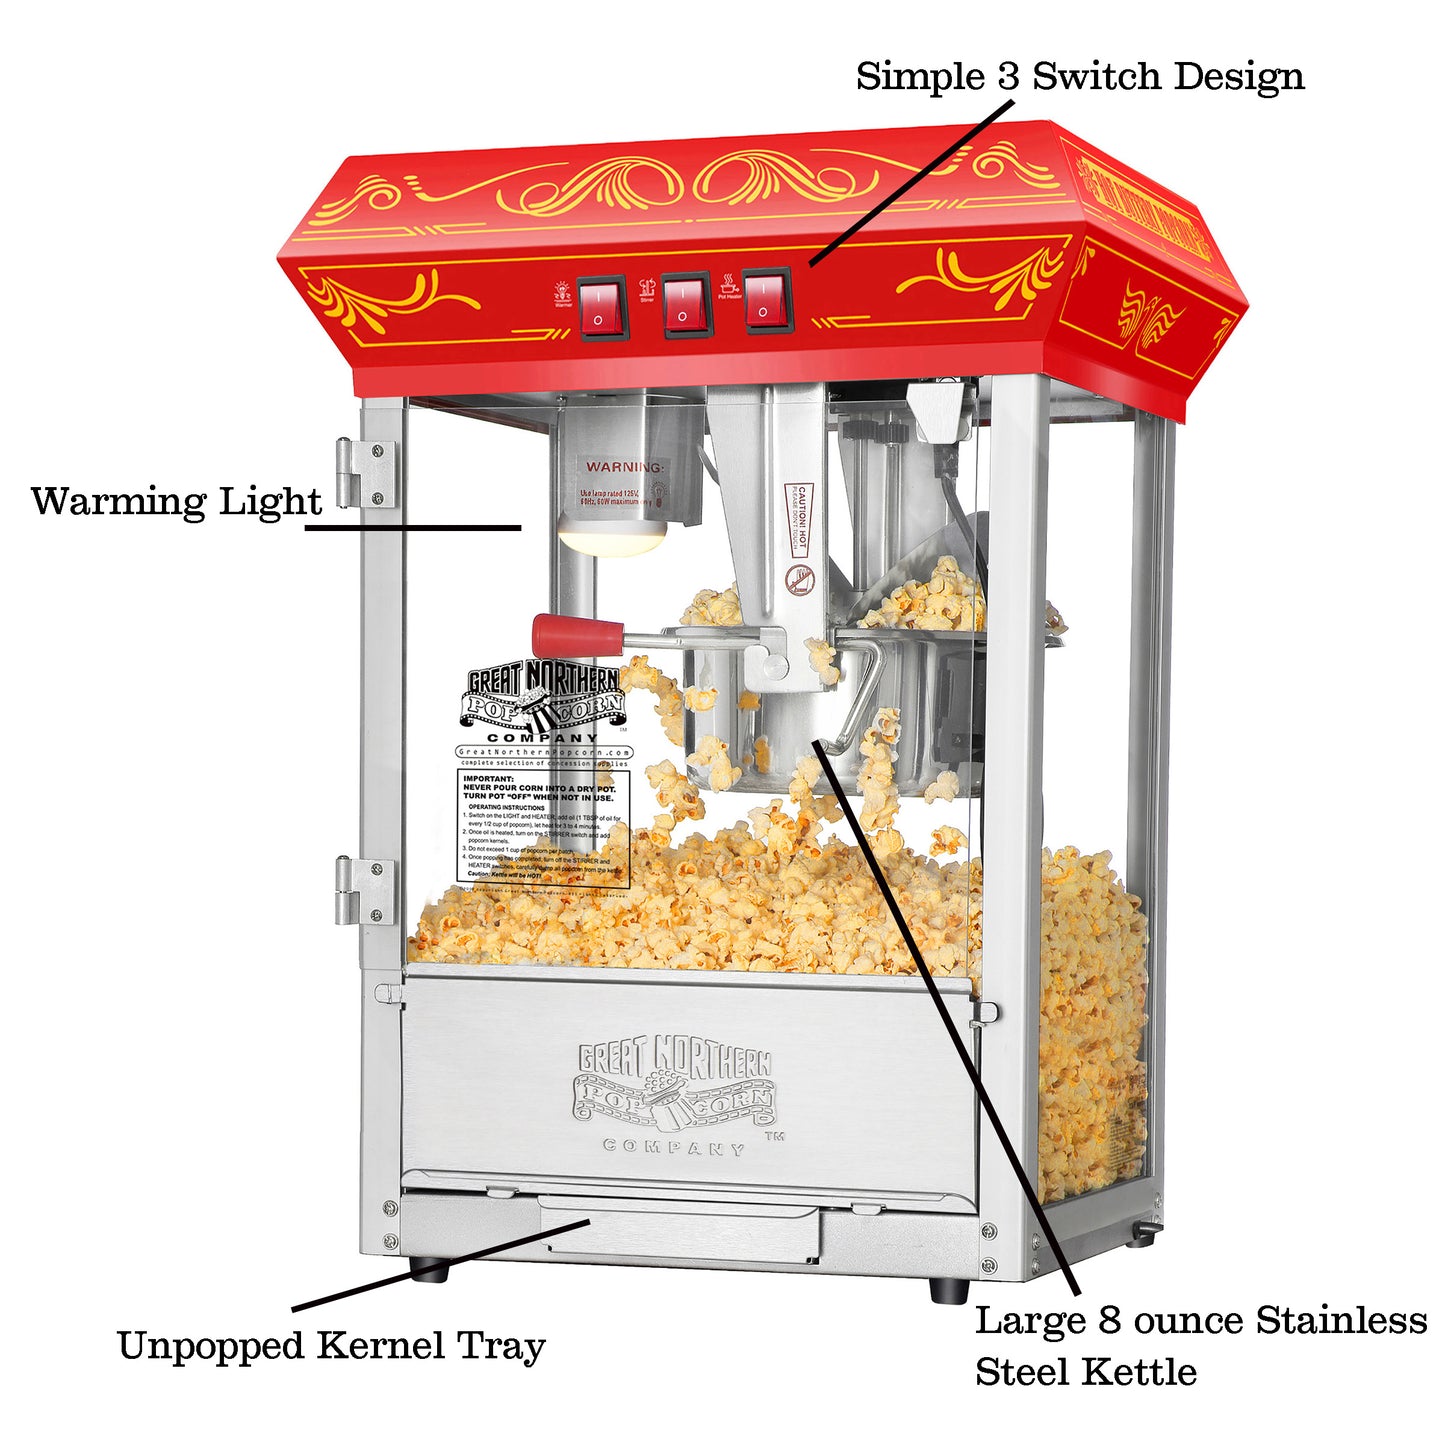 Good Time Countertop Popcorn Machine with 8 Ounce Kettle and 5 All-In-One Popcorn Packs - Red